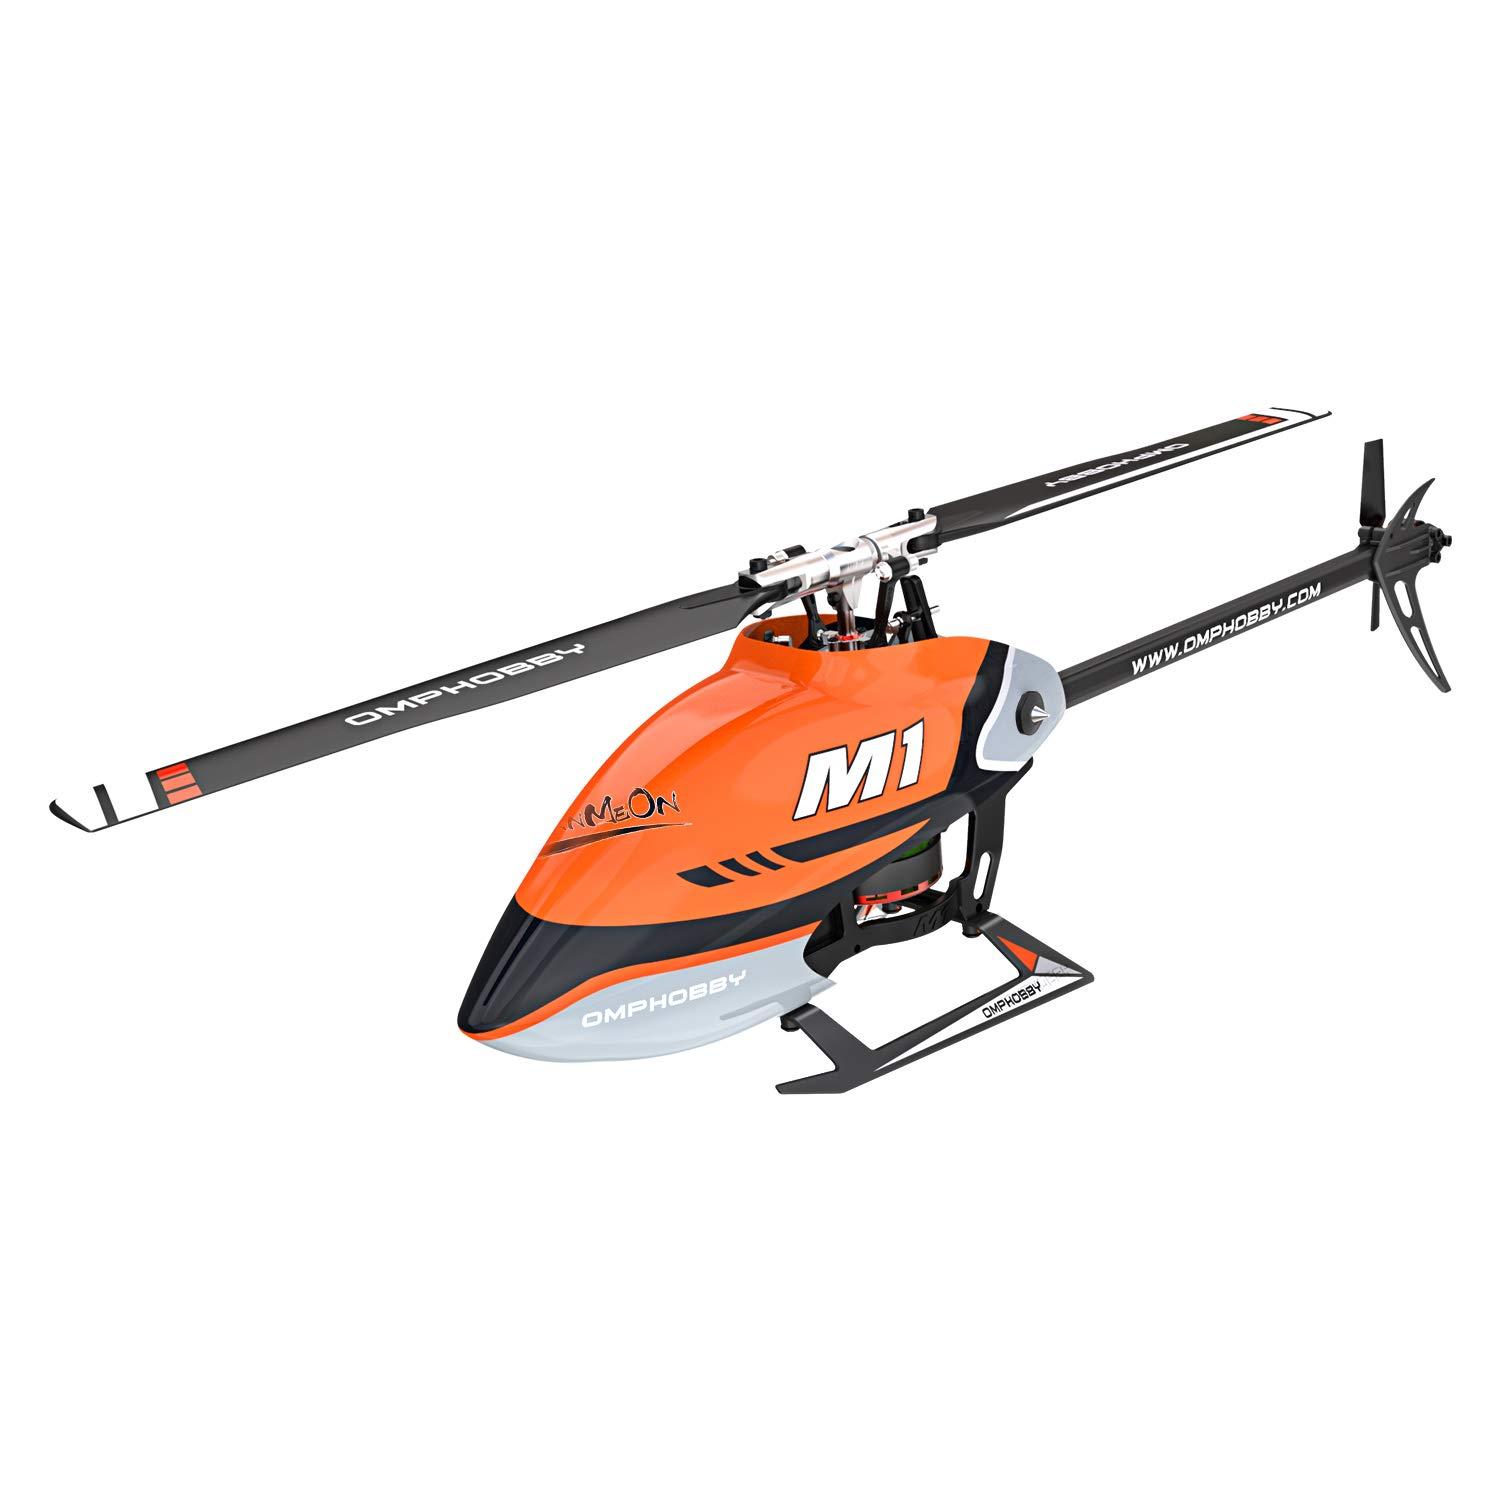 Omphobby Helicopter:  Trusted Brand for All Levels of RC Helicopter Experience